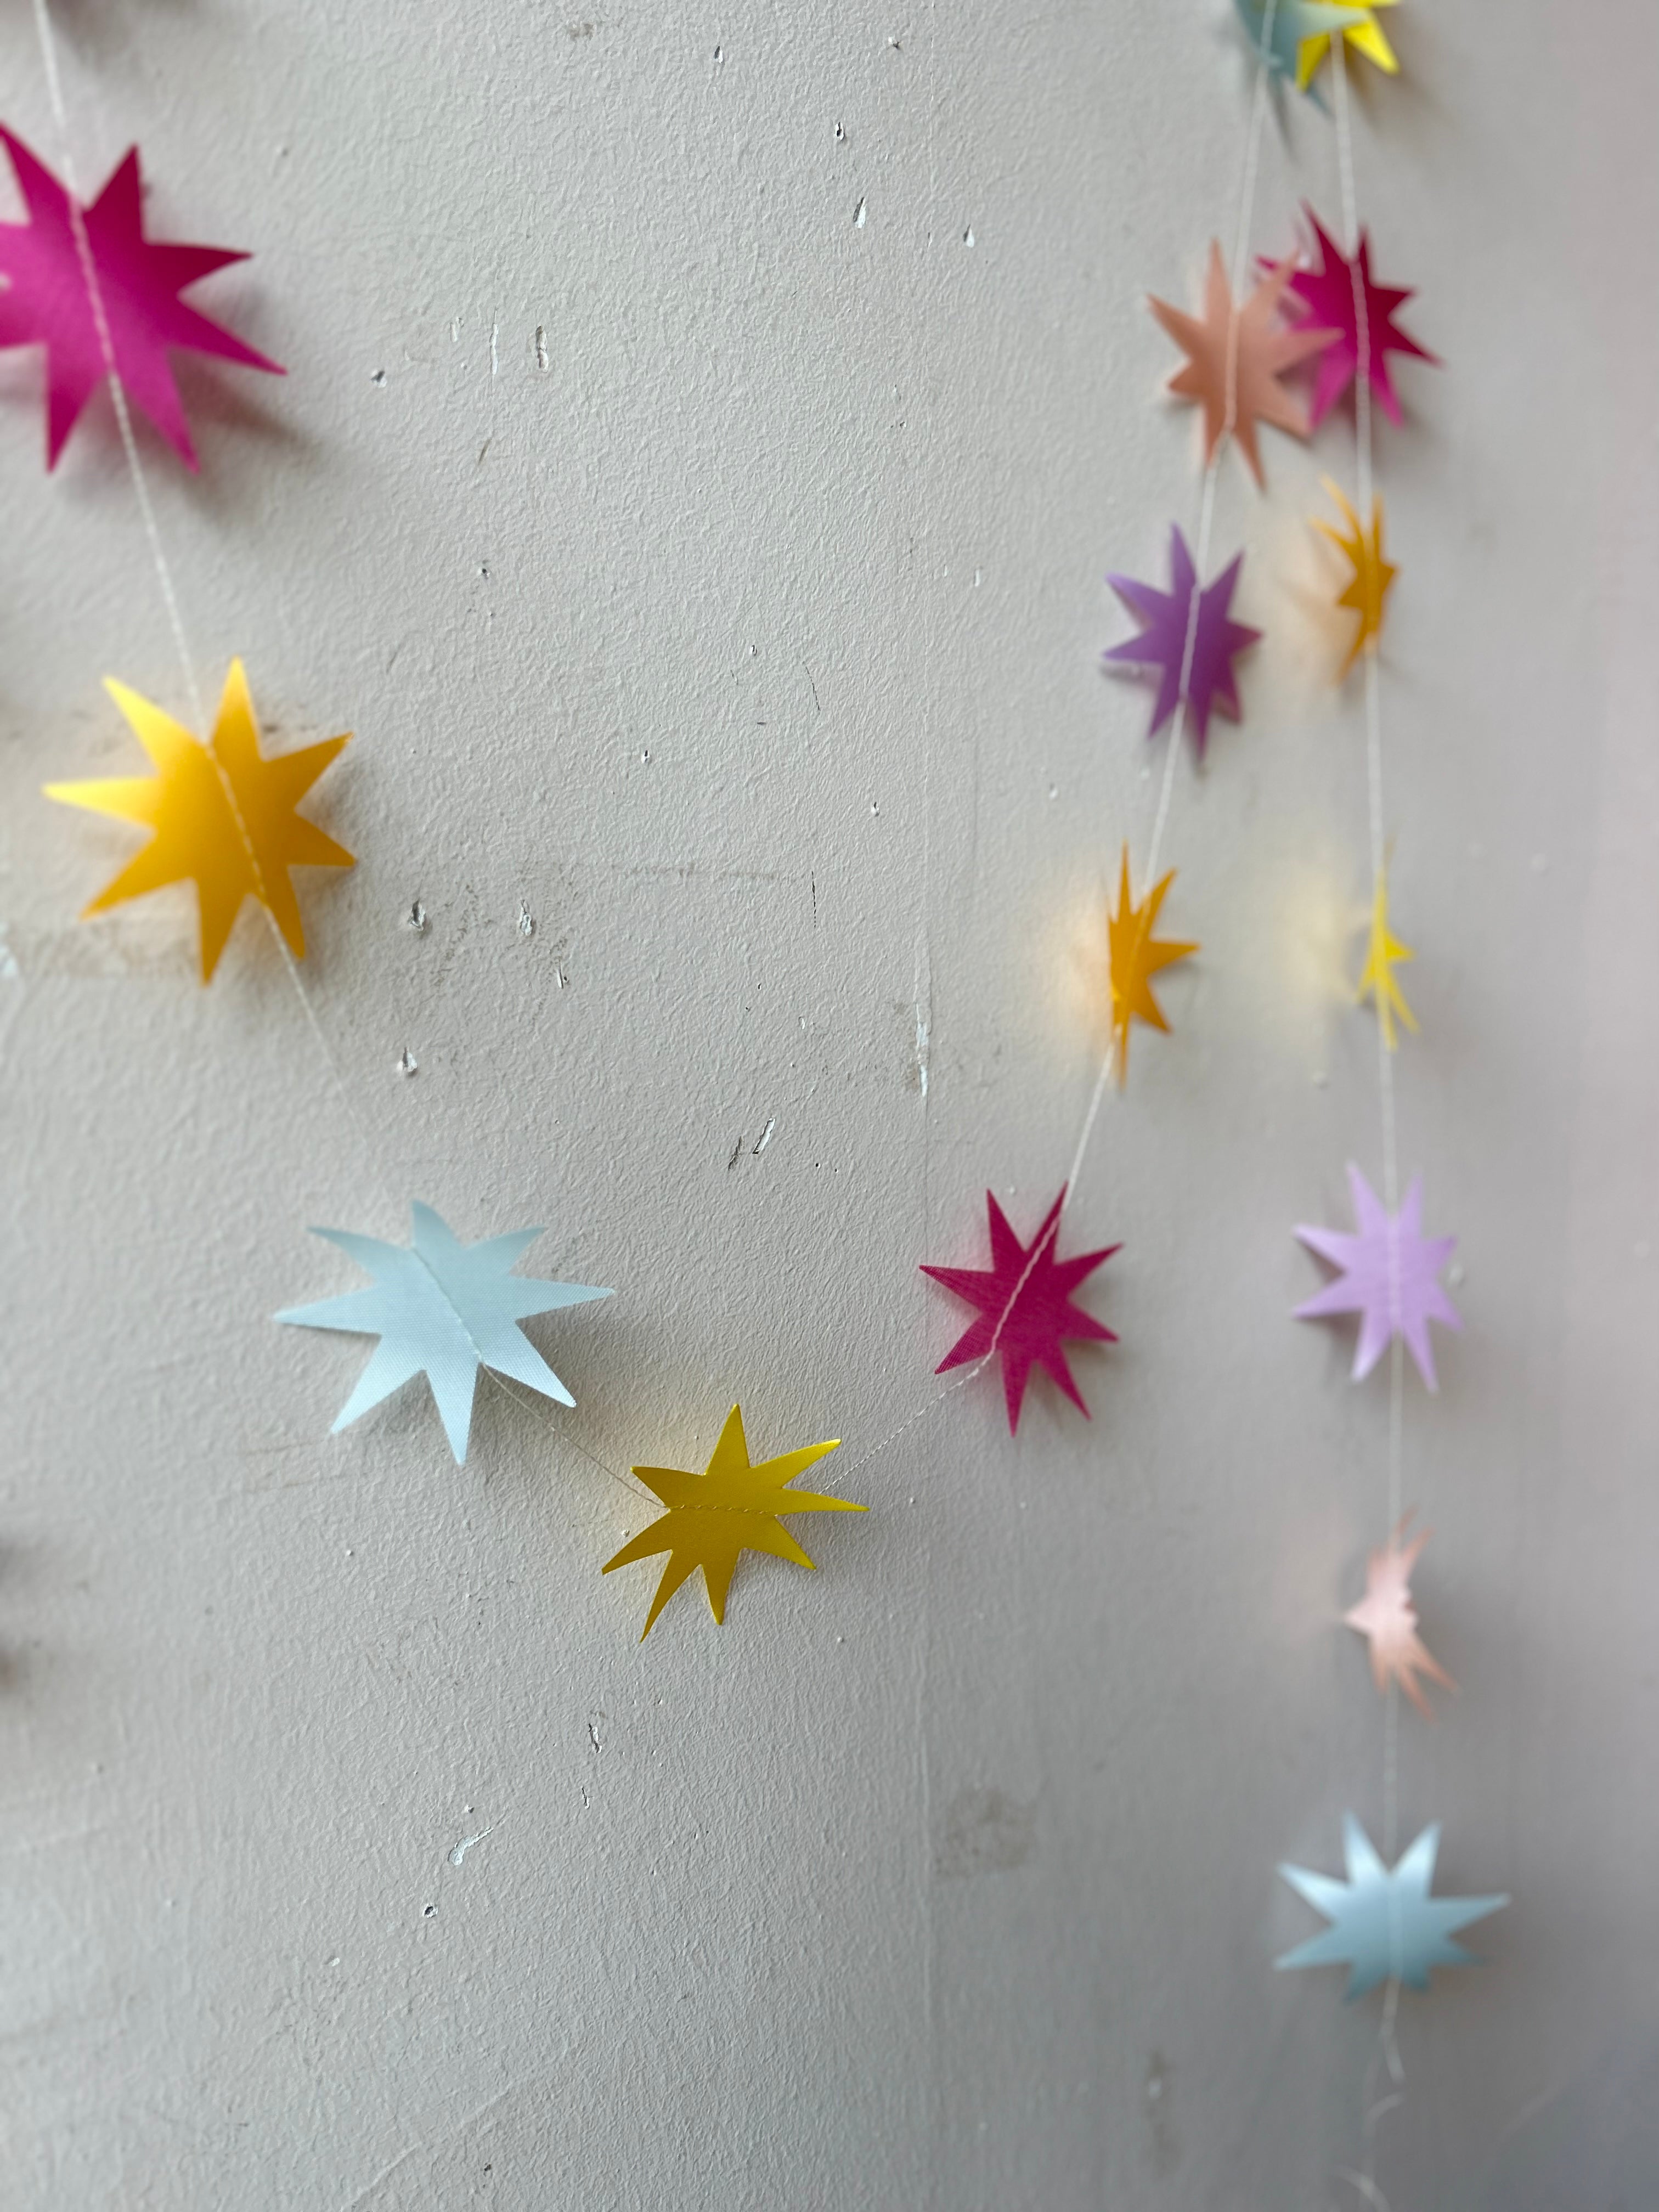 Stitched Starburst Garland - Fruity Colors